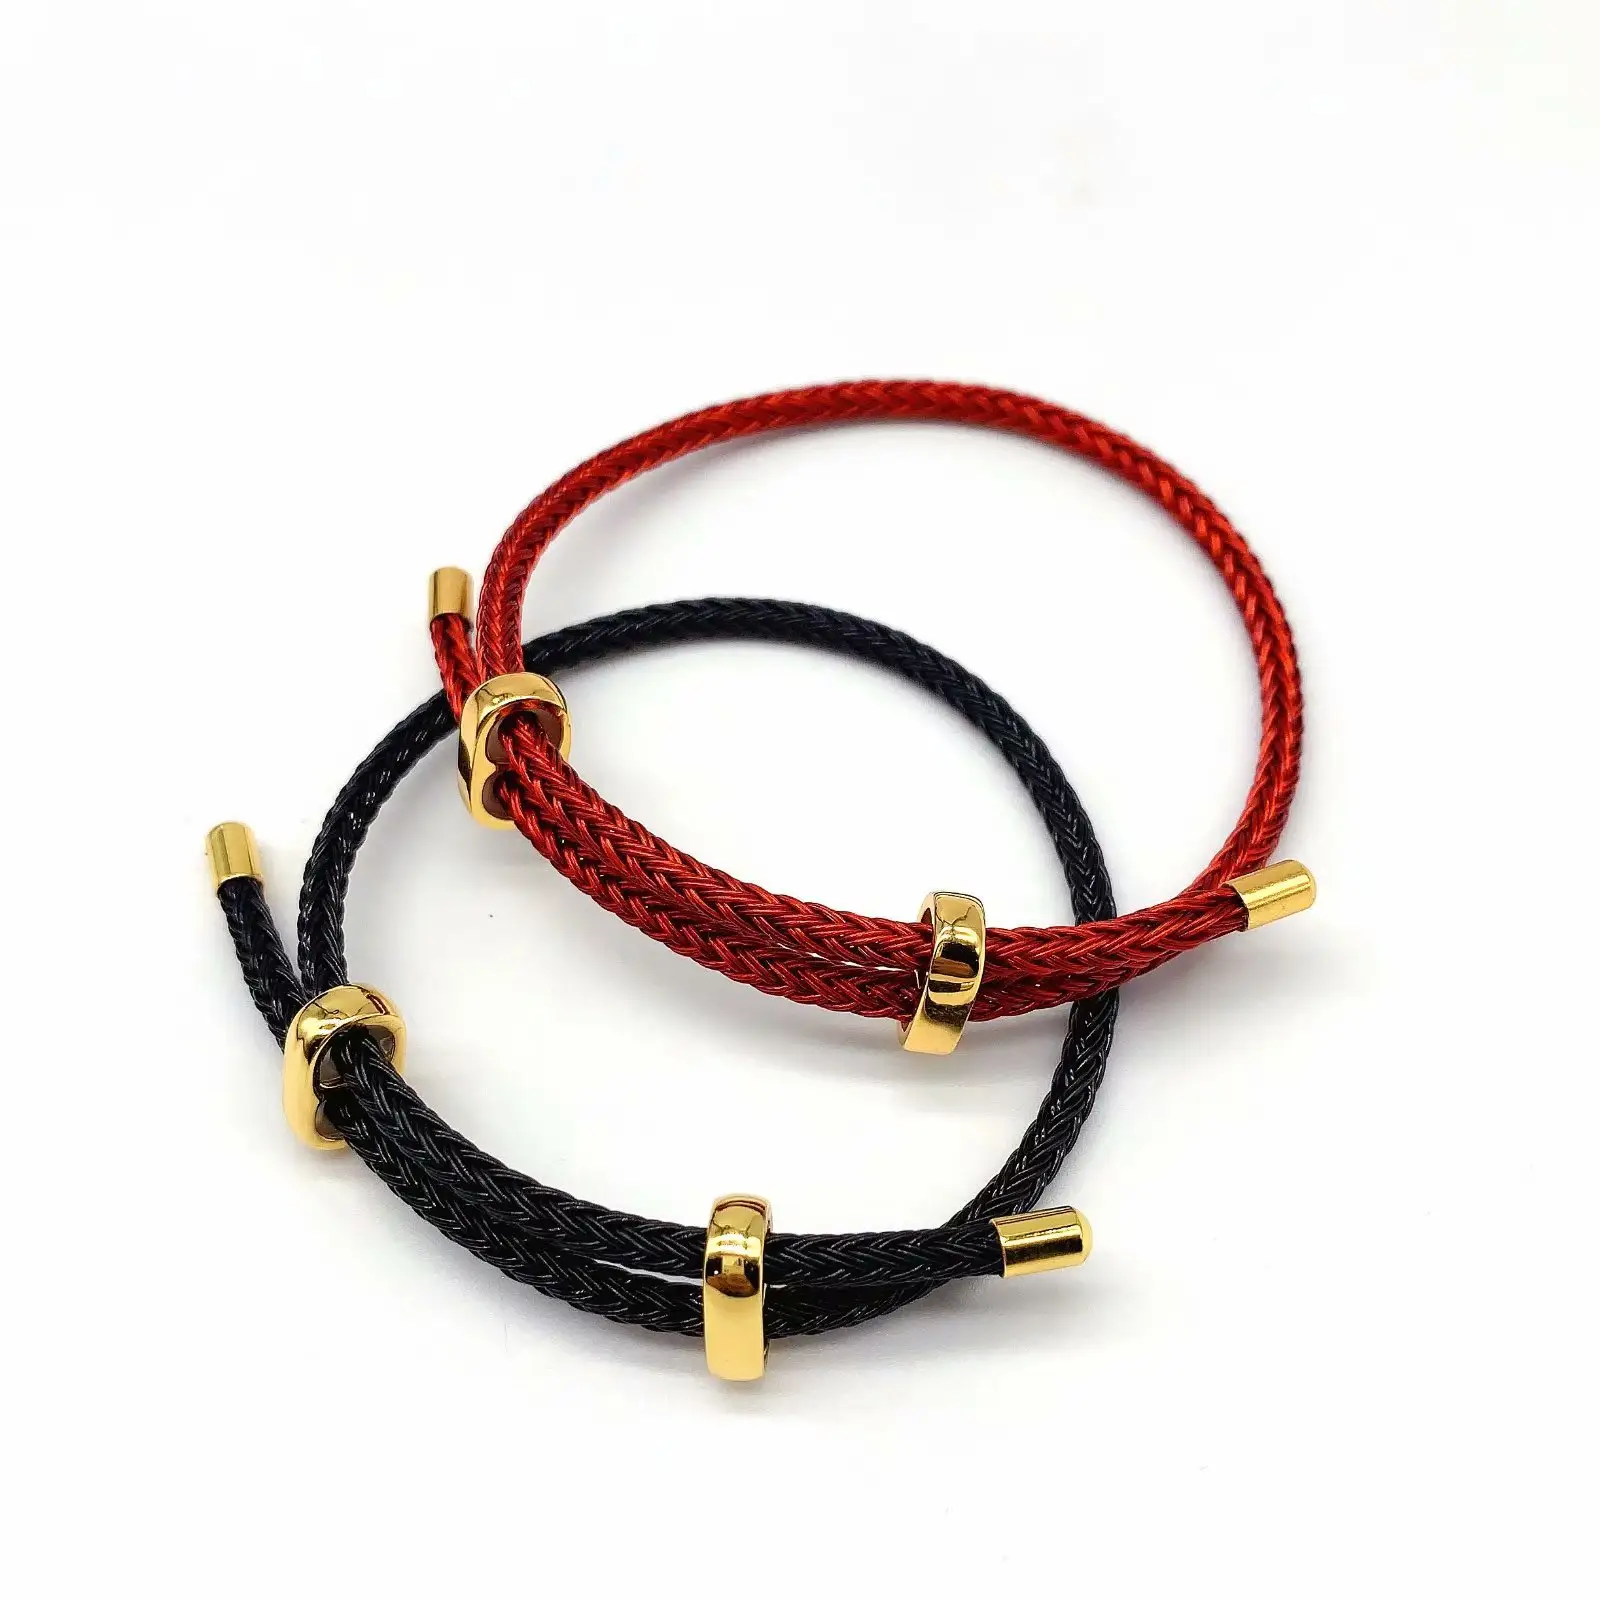 Leather Rope Braided Cord Bracelets Stainless Steel Gold Metal Handmade Diy Jewelry Bracelet For Men And Women